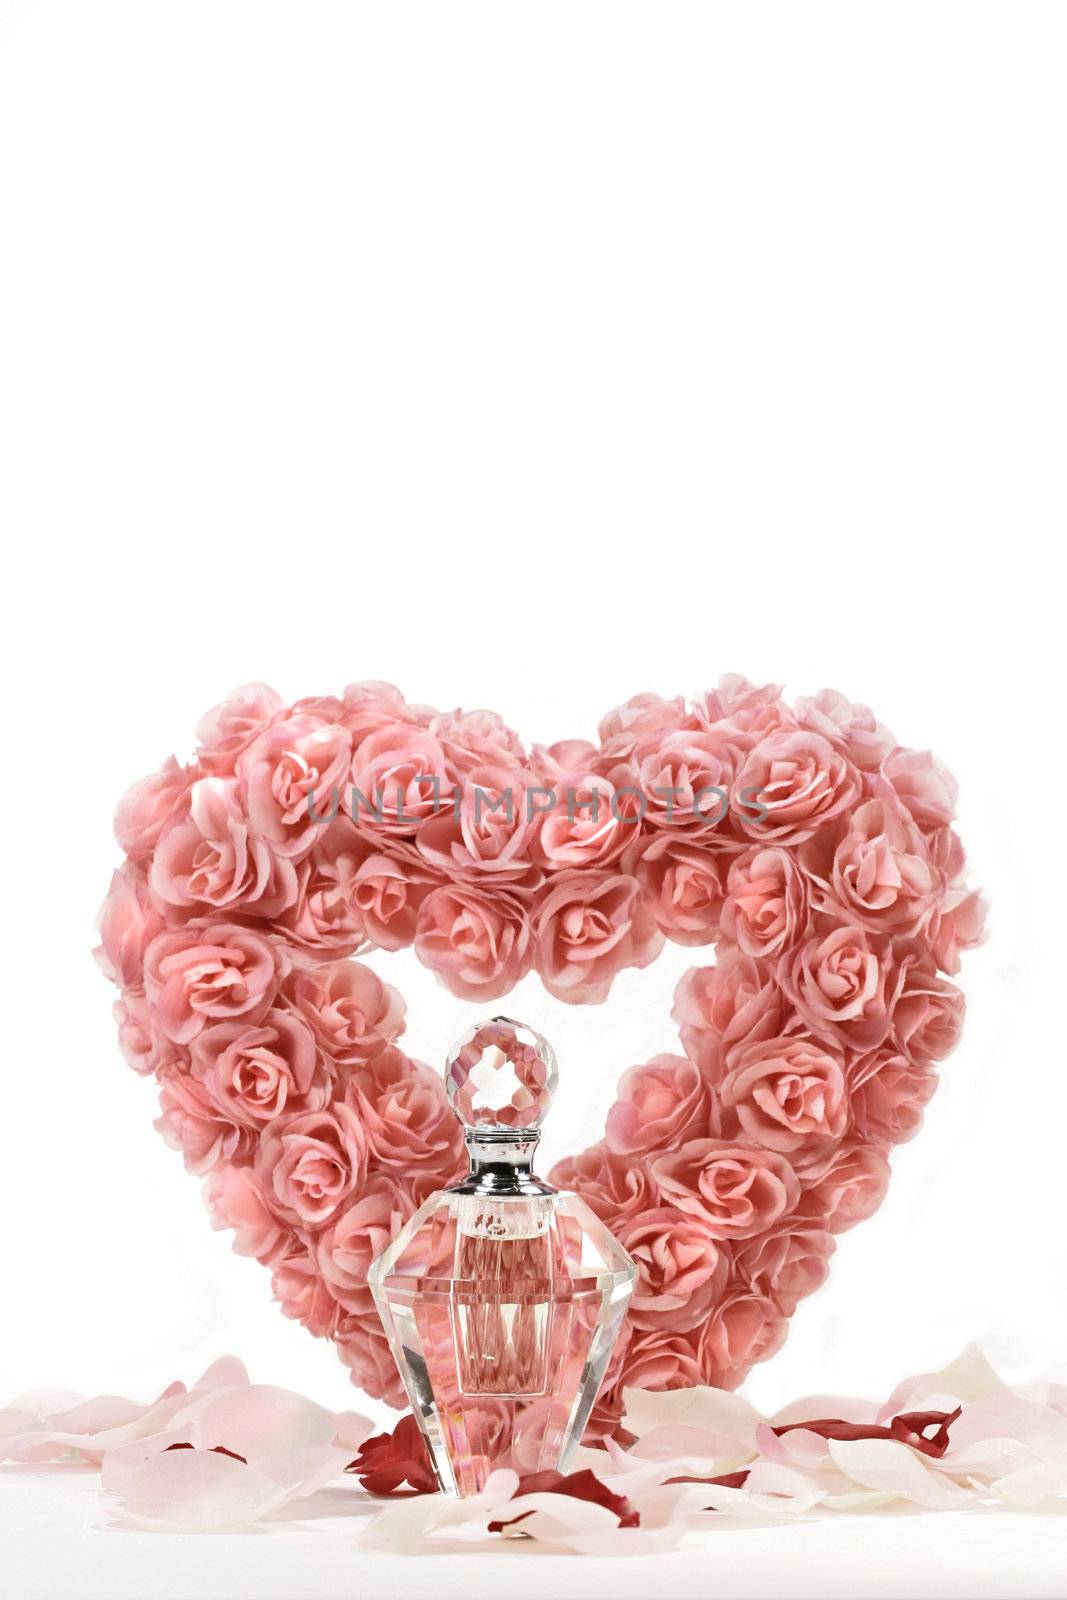 Heart of roses with crystal bottle by Sandralise